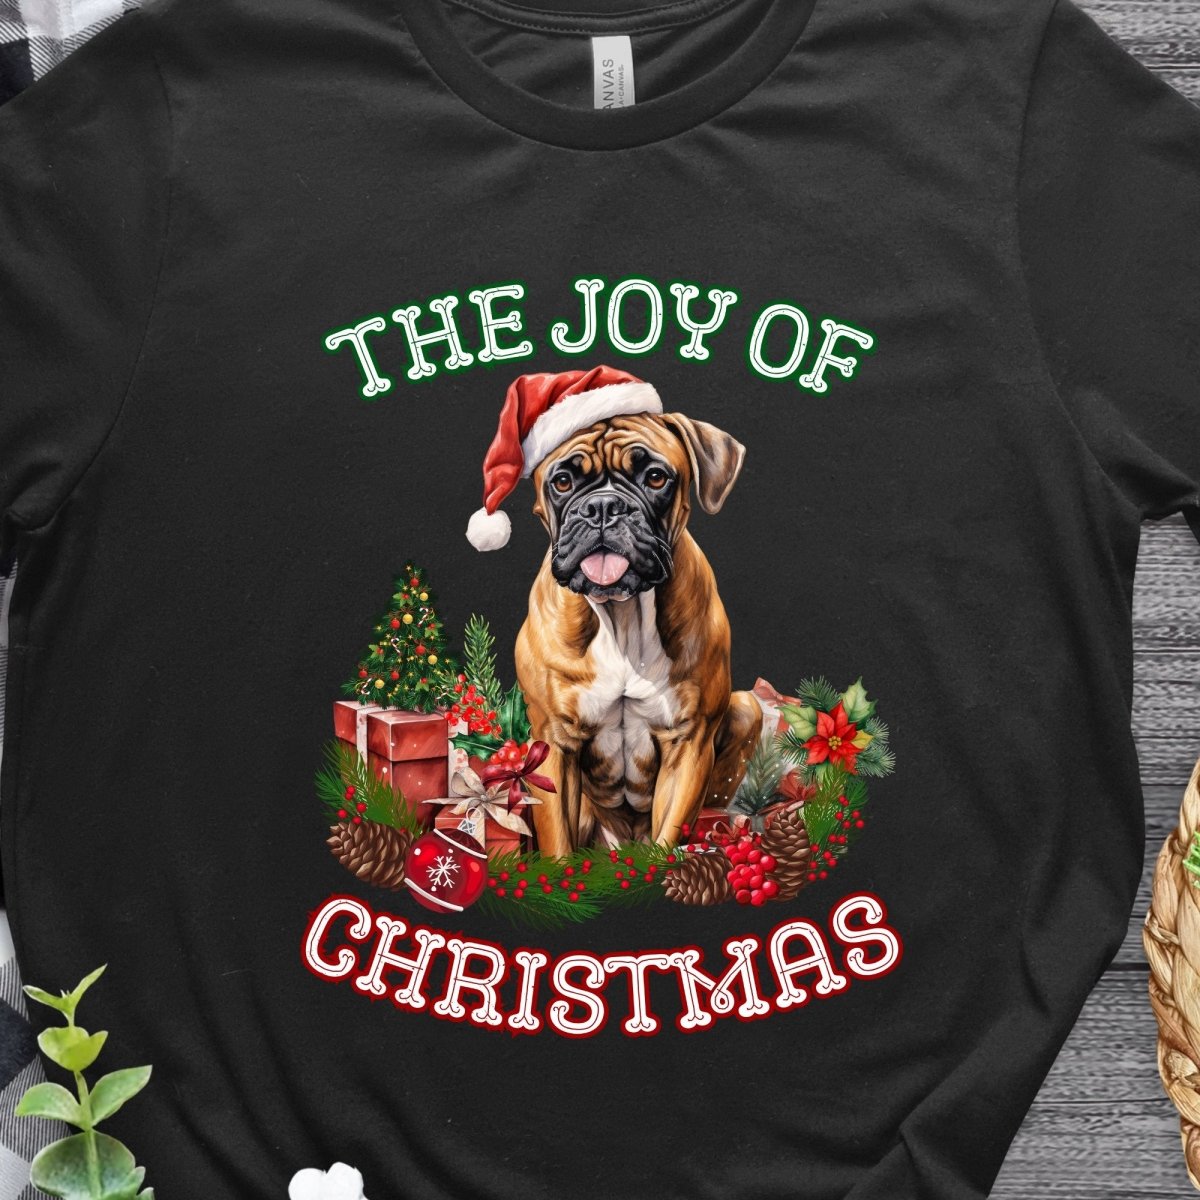 Christmas Boxer T-Shirt - High Quality Festive Unisex T-Shirt, Gift for Boxer Owner, Gift for Doglovers, Funny Xmas Shirt, Cute Xmas Dog Tee - Everything Pixel